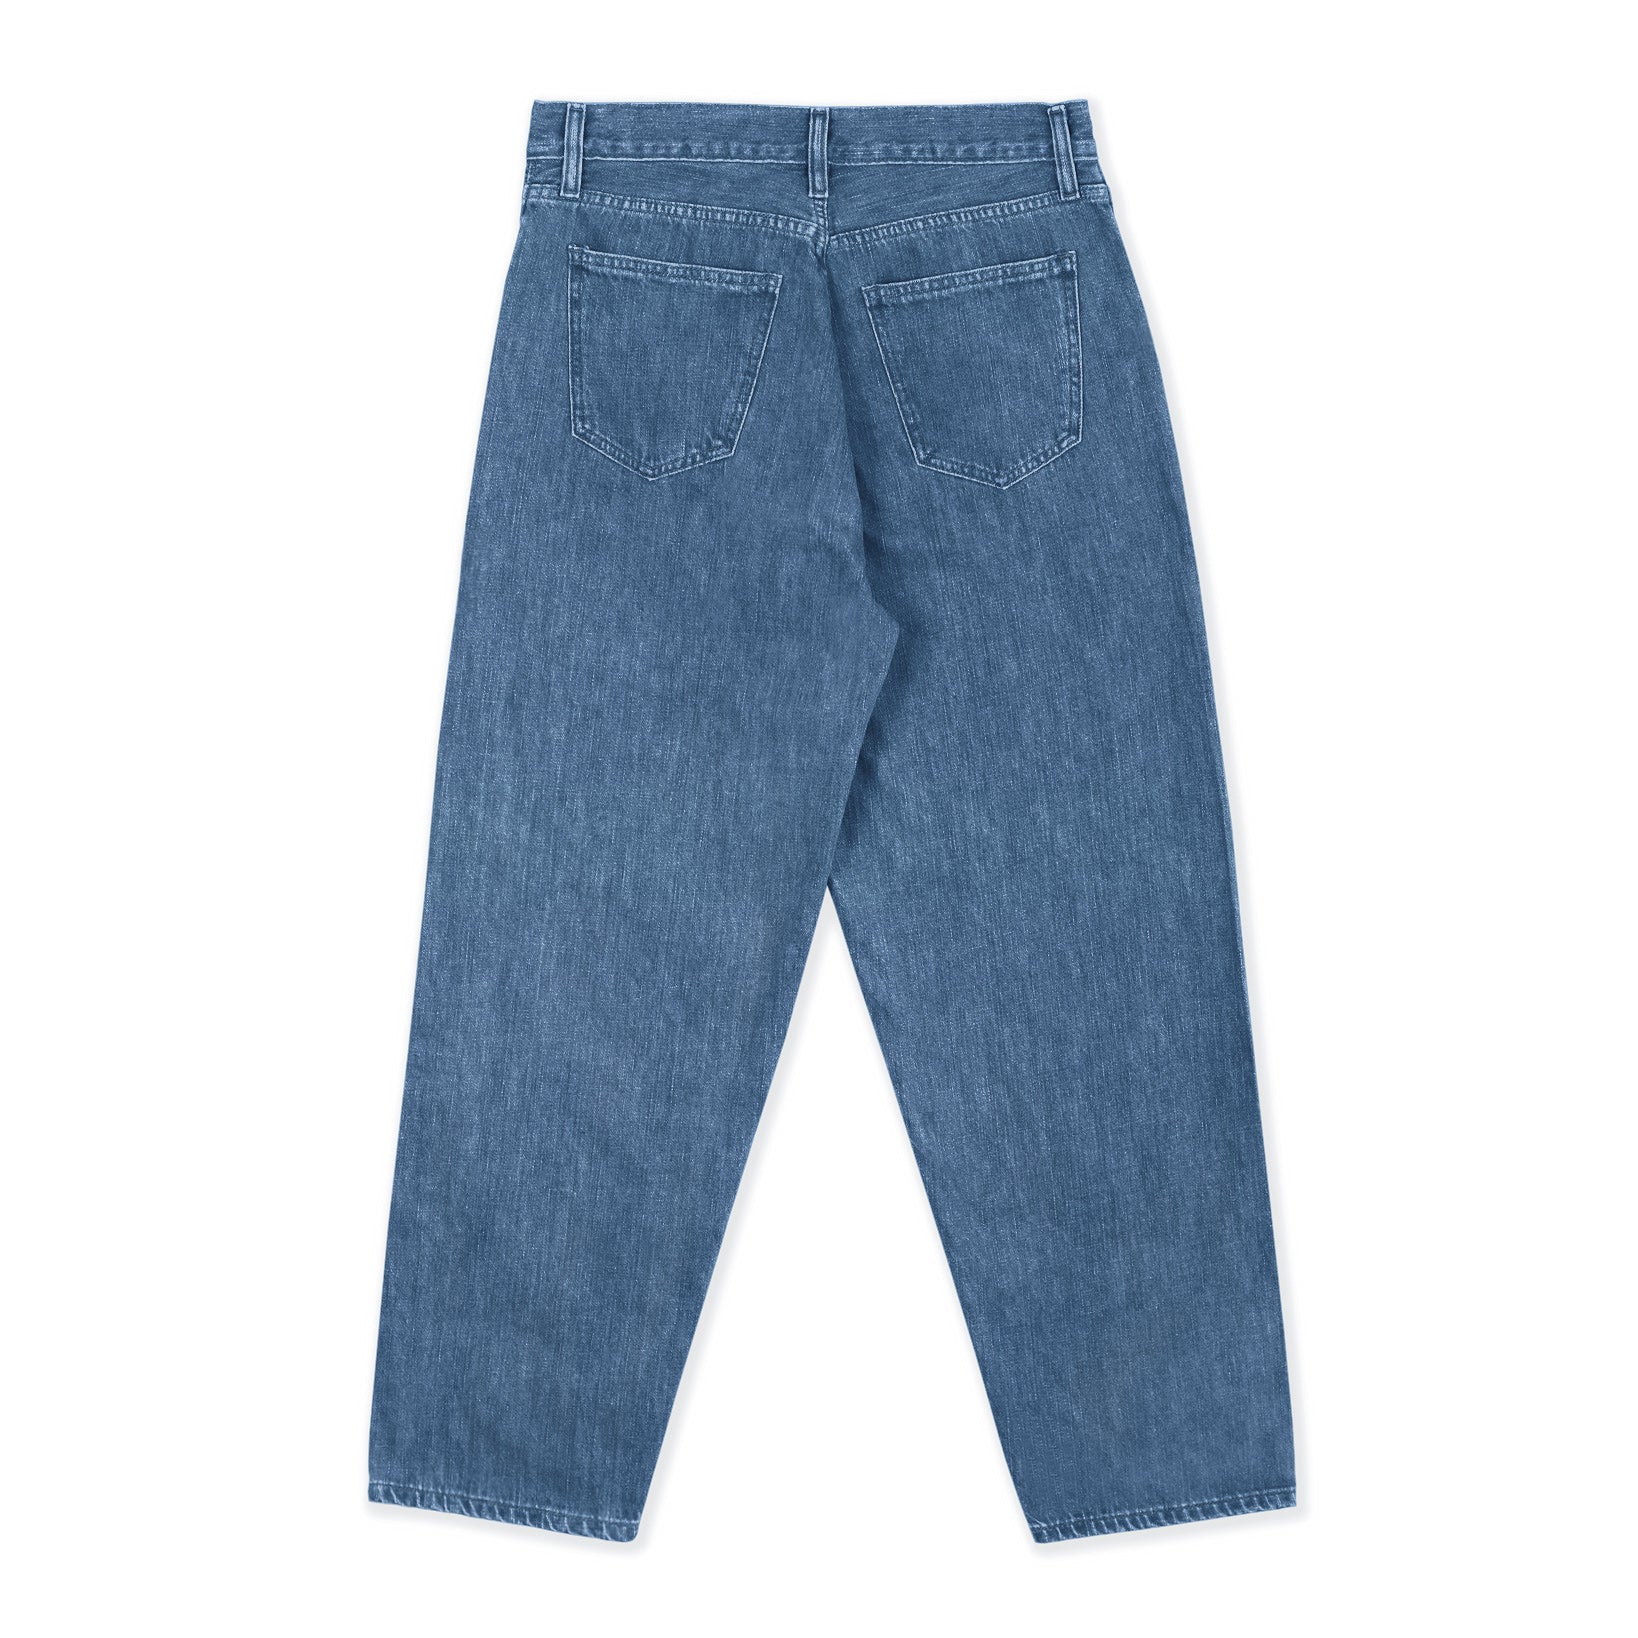 Wide Fit Organic Jean in Eco Stone Washed Selvedge Denim